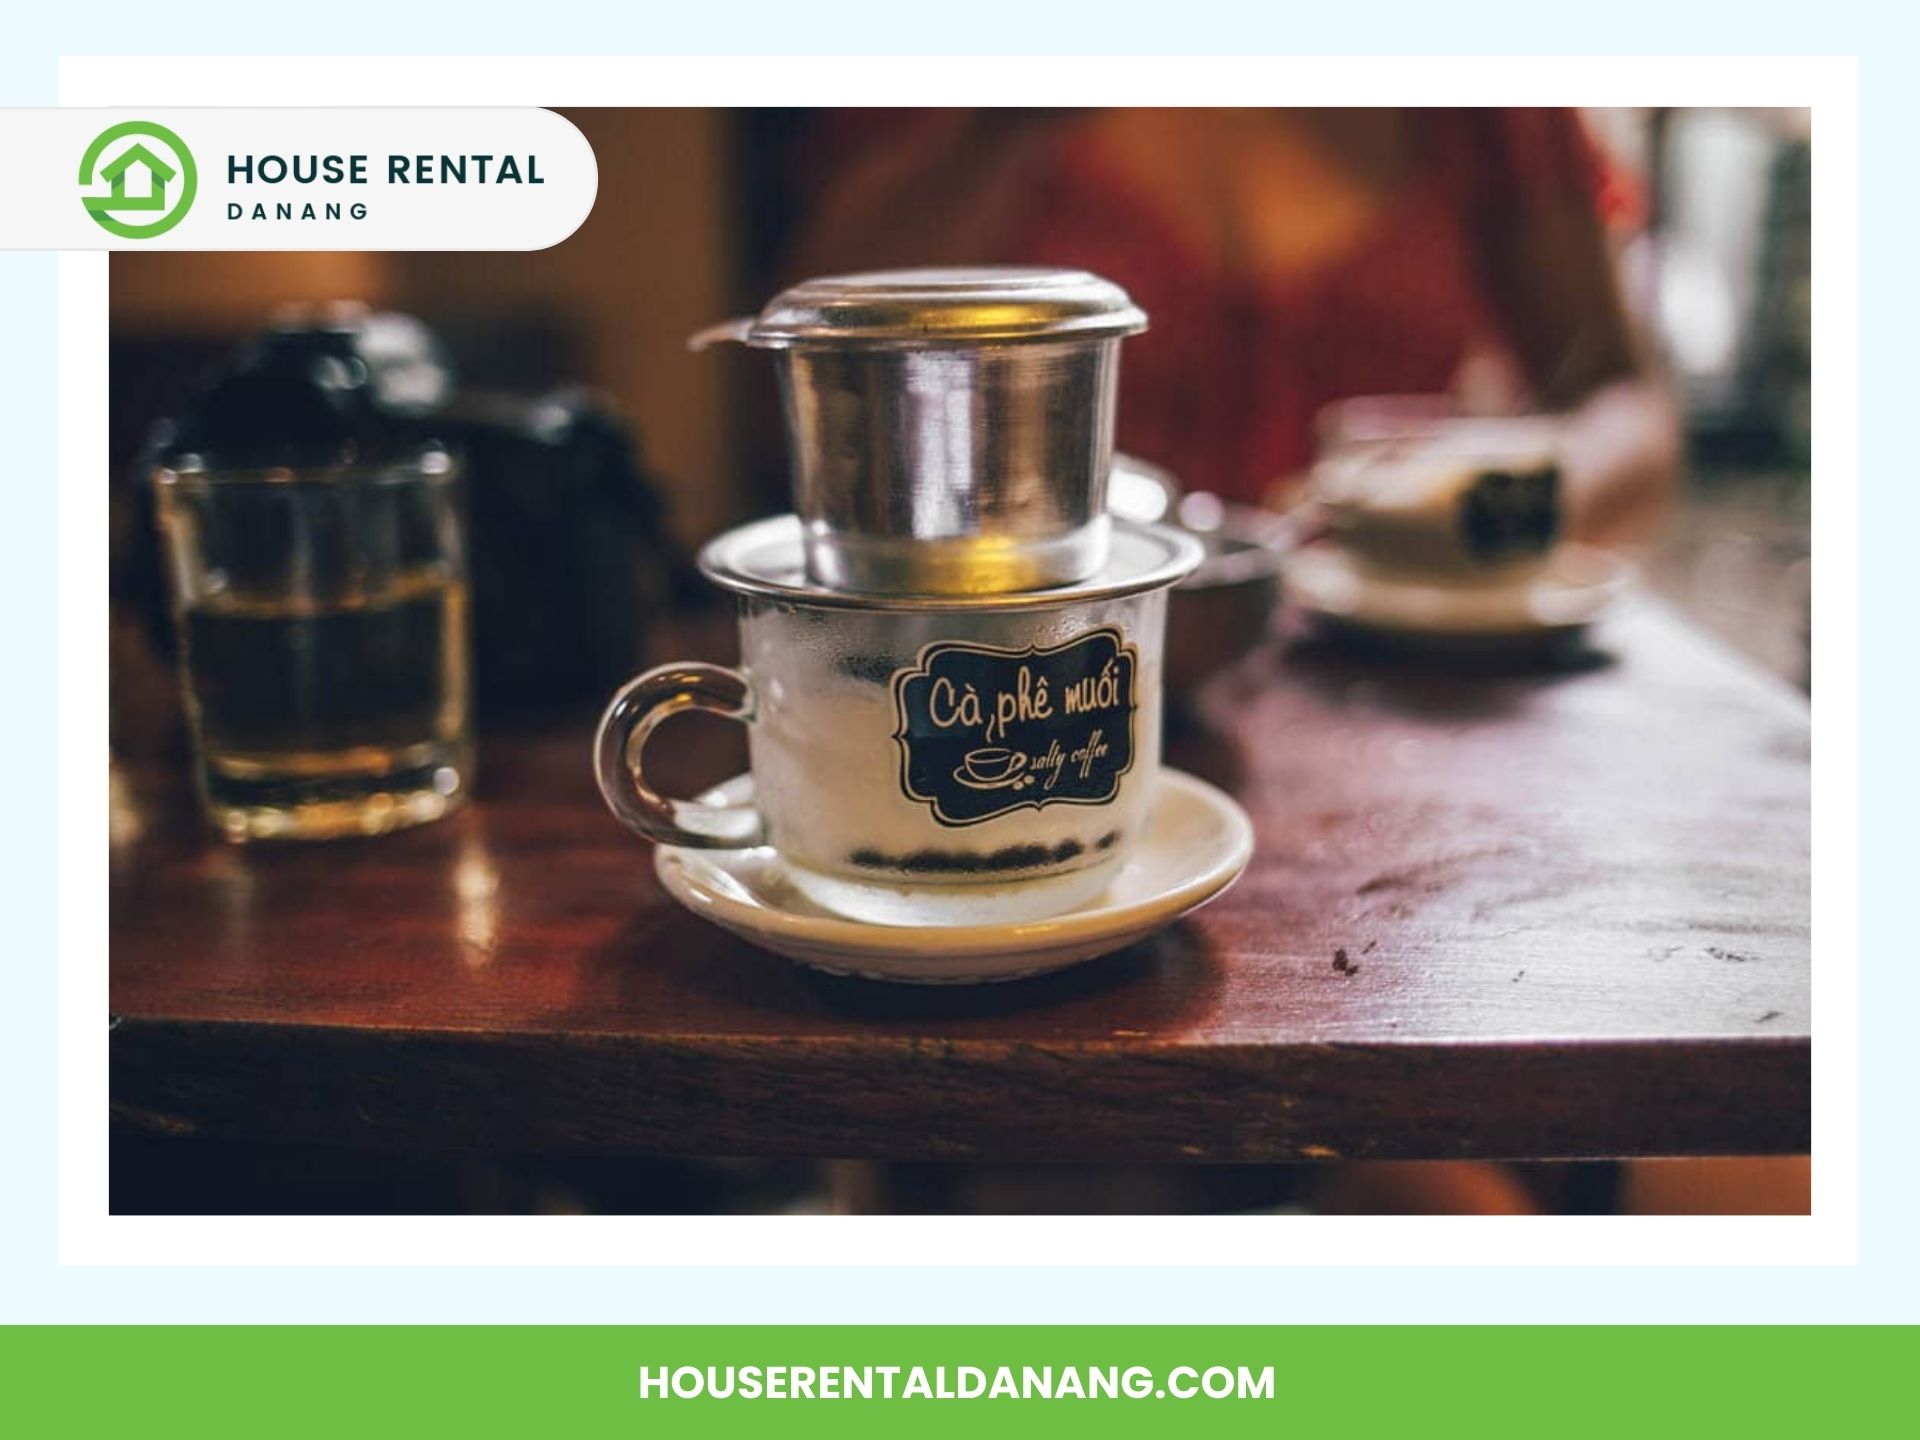 A Vietnamese drip coffee sits on a wooden table with a glass of water alongside. A person is partially visible in the background. The image border features a "House Rental Danang" logo and website, hinting at nearby adventures like the Best Places for Shopping in Da Nang.